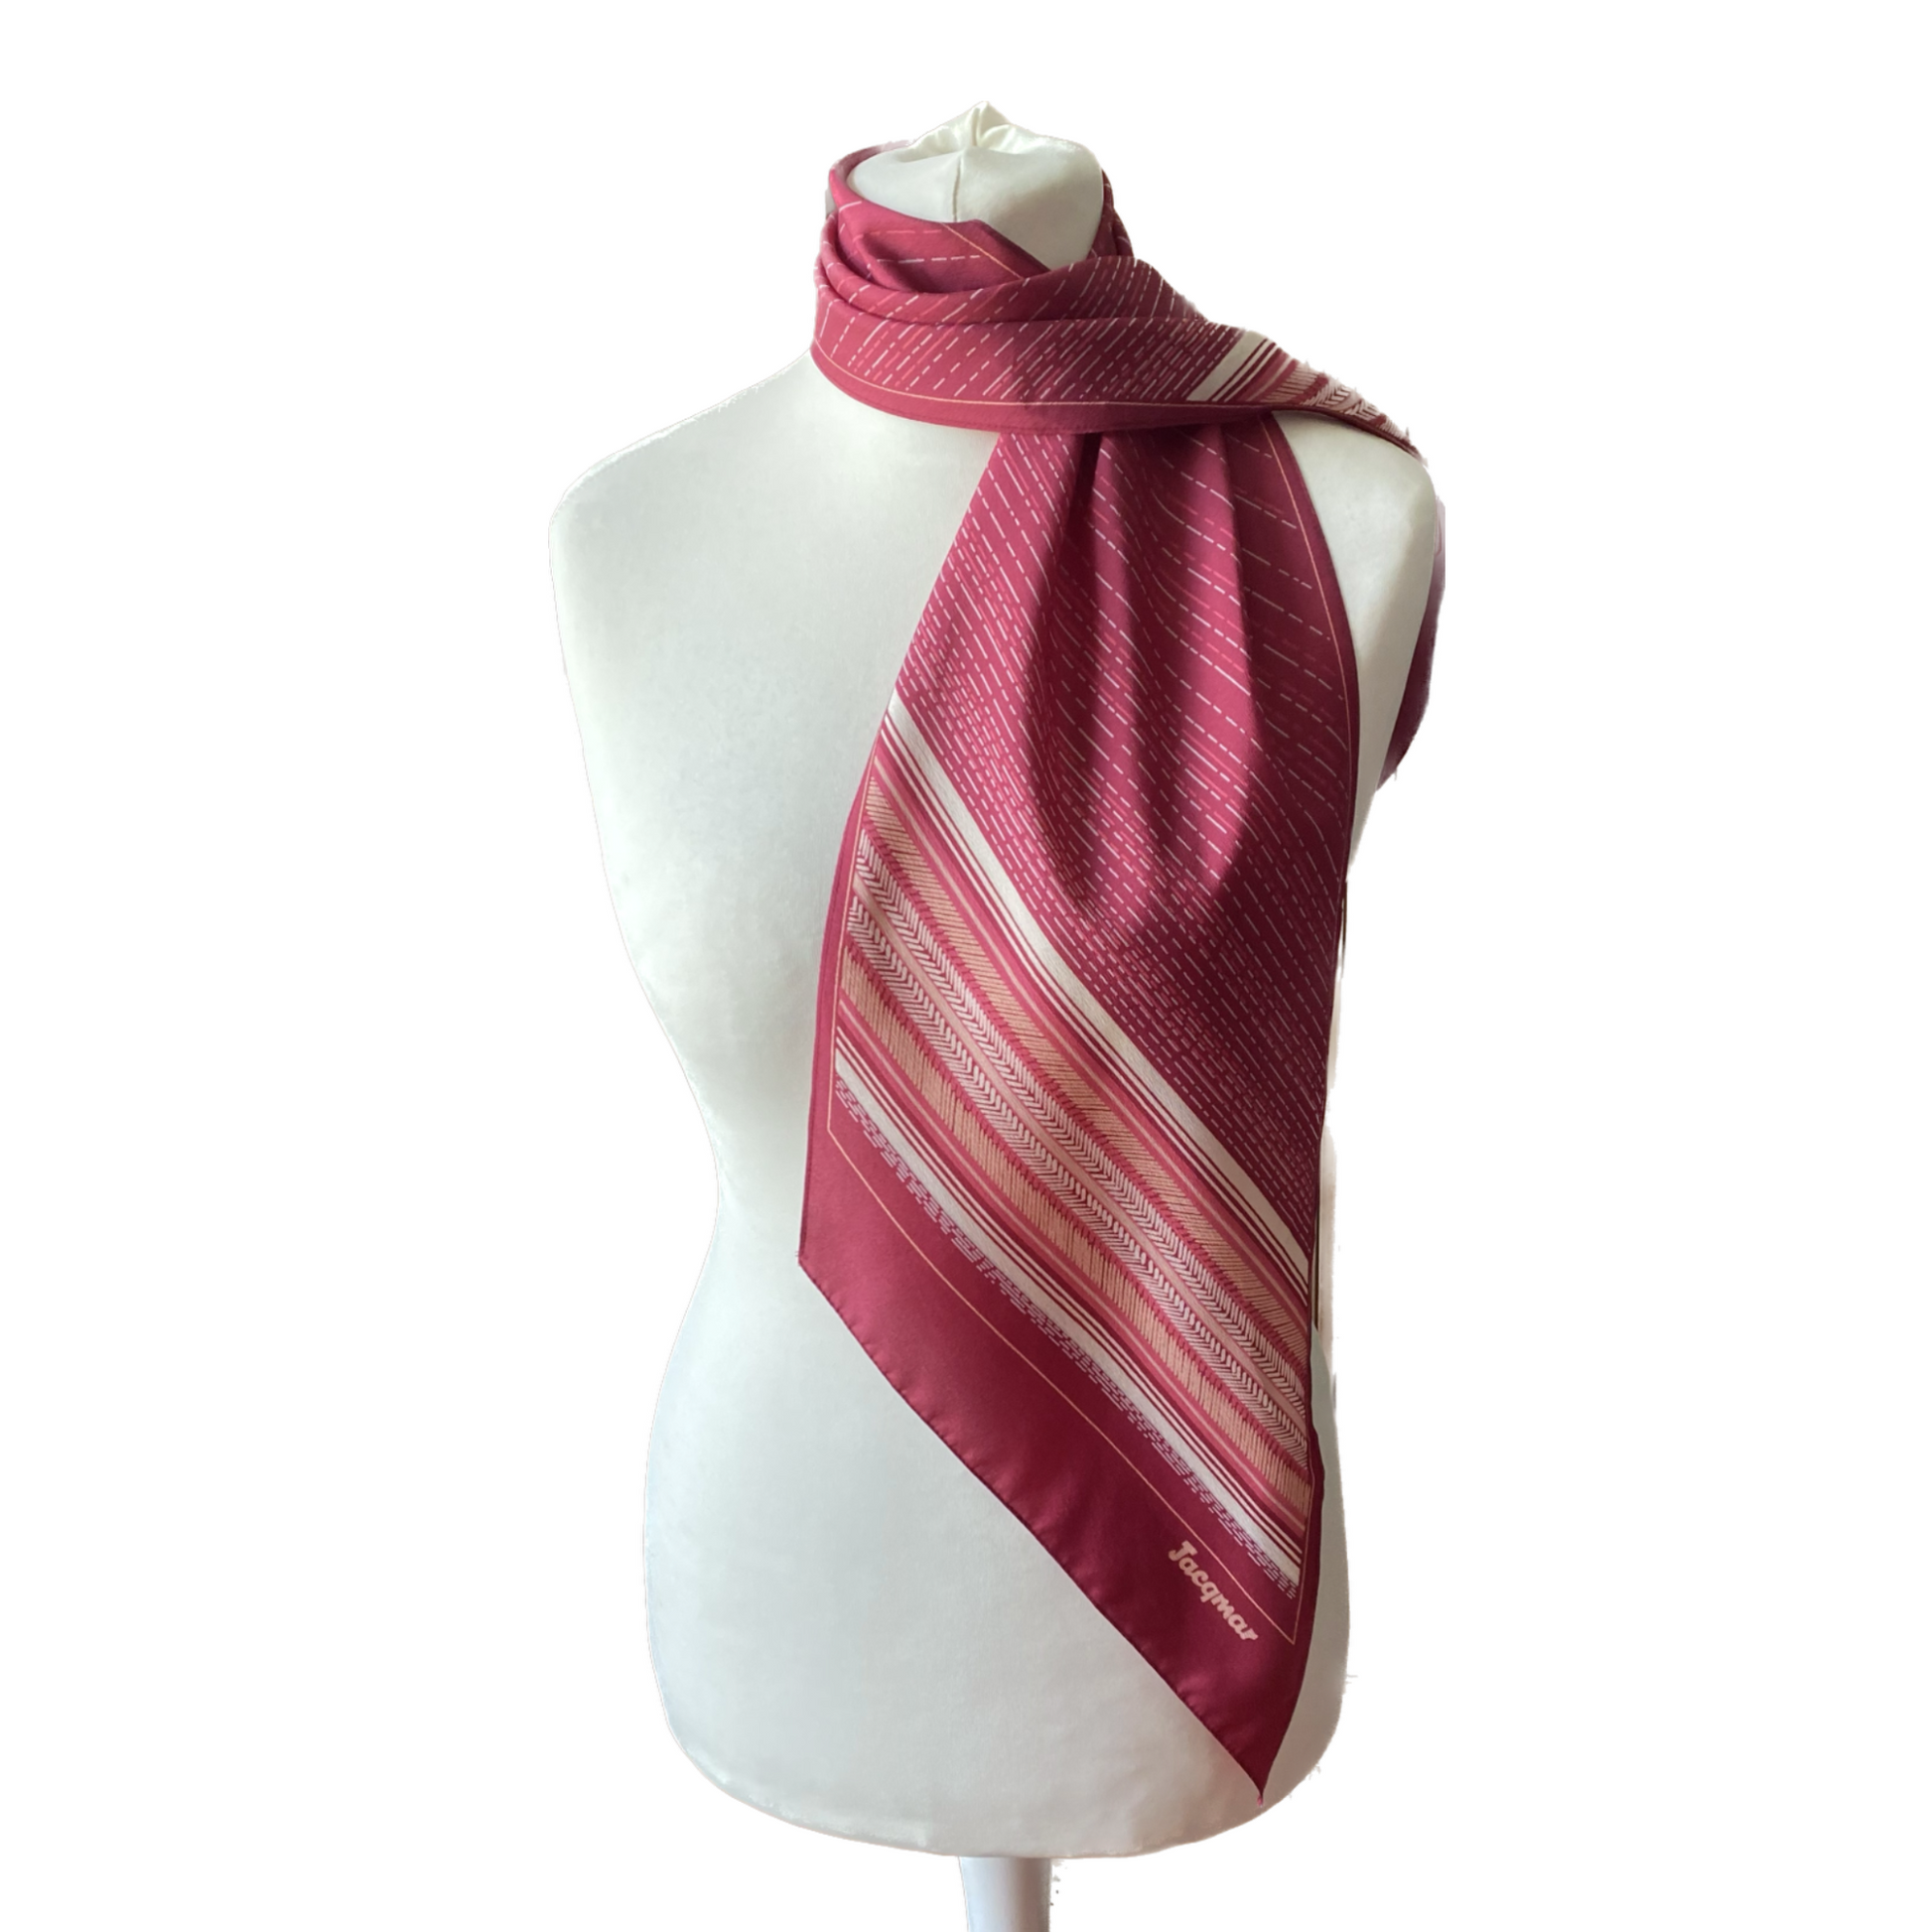 Long purple, pink and cream print scarf - Versatile accessory for any outfit.